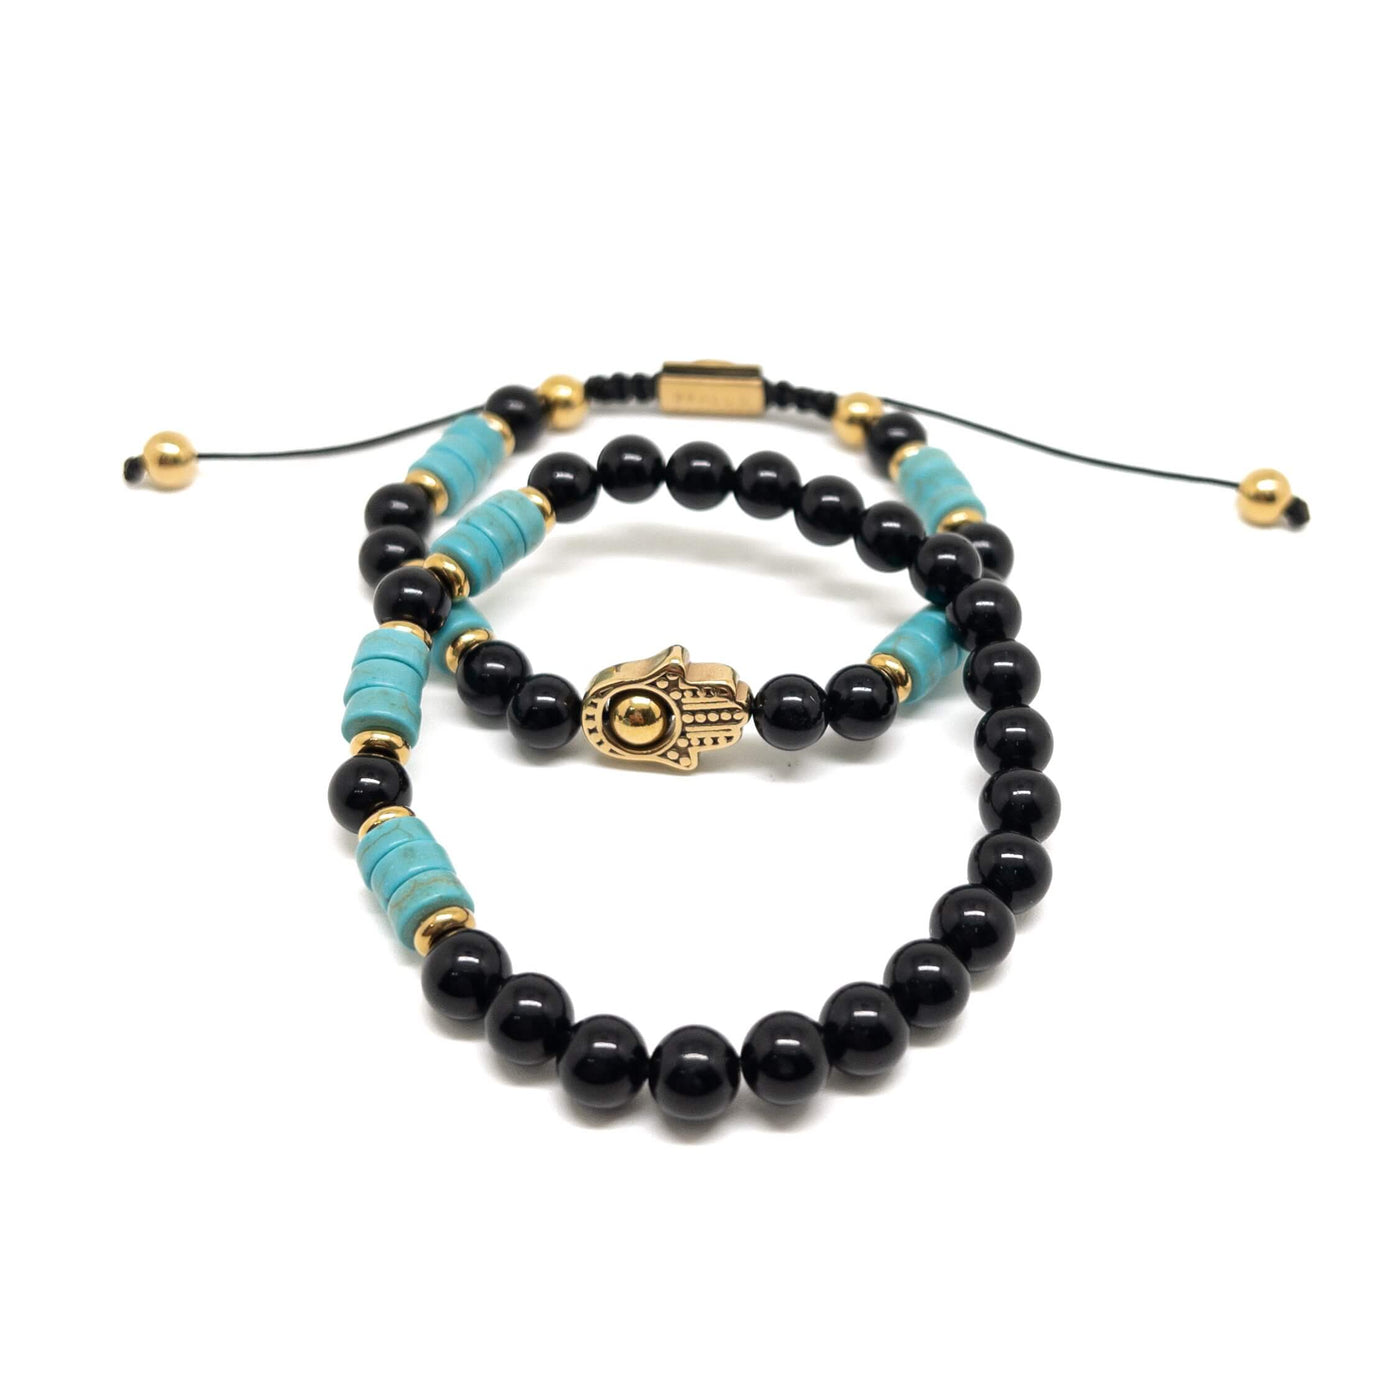 The Turquoise Heishi and obsidian Stack